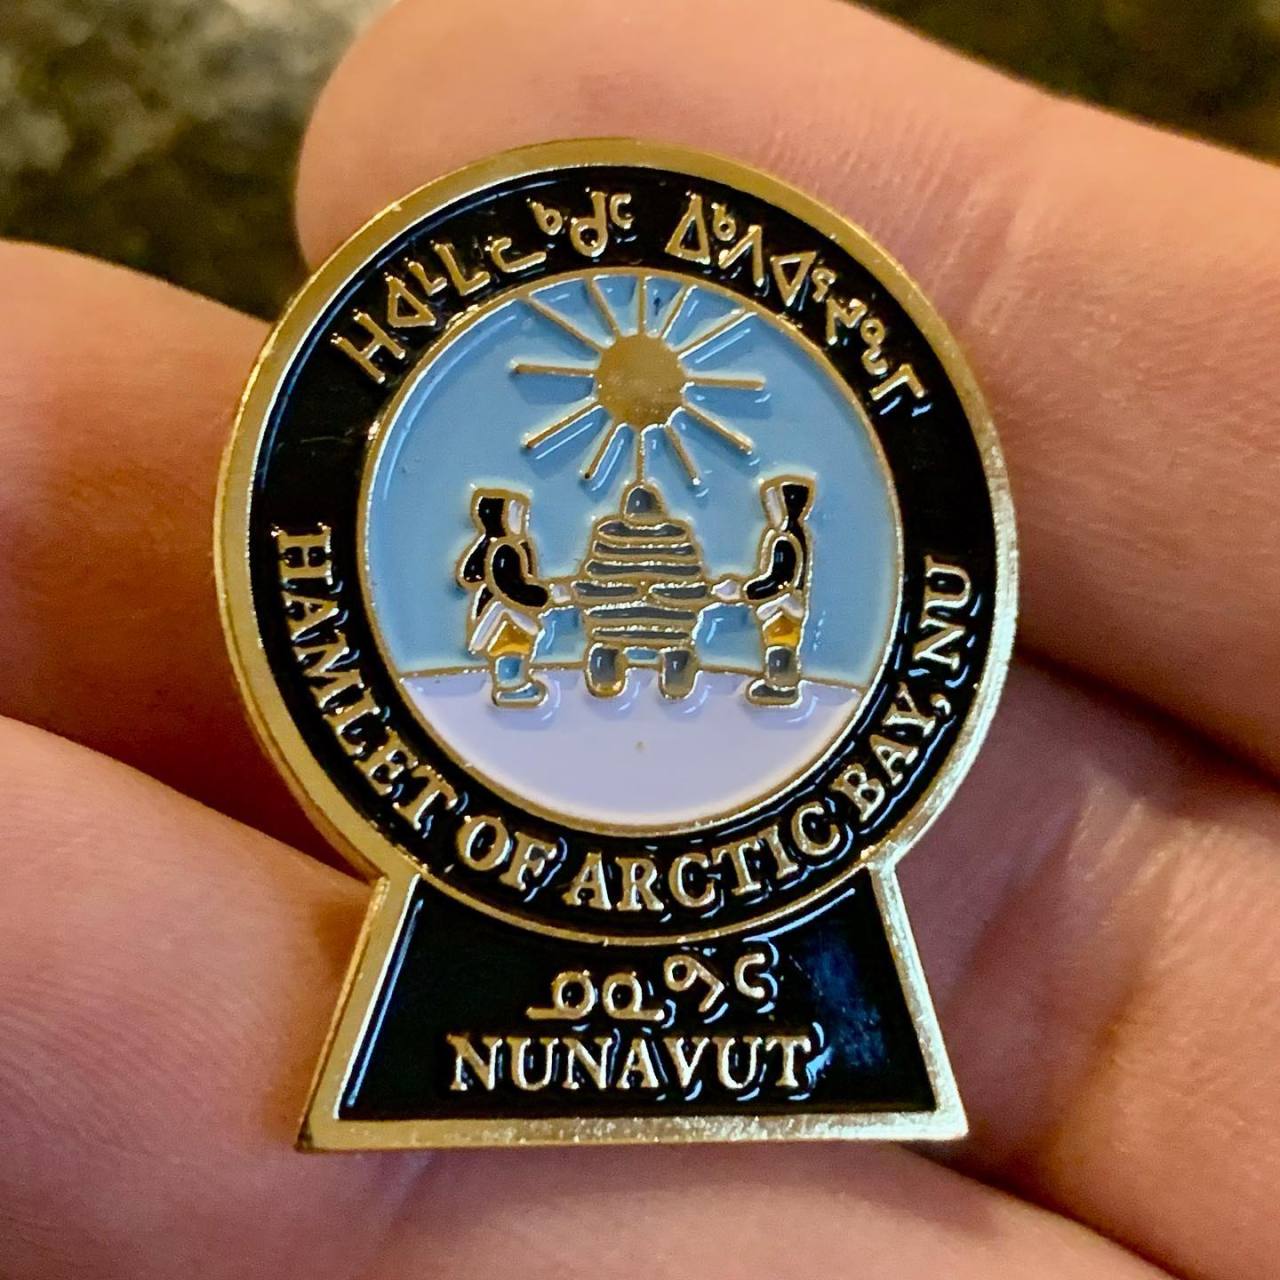 What do you see here? Is it Masonic, Masonic adjacent or just not Masonic at all?
#Inuksuk #arcticbaynunavut #northwestpassage
This is a pin that was gifted to me by way of Arctic Bay in Nunavut CA territory. It depicts two people stacking rocks...